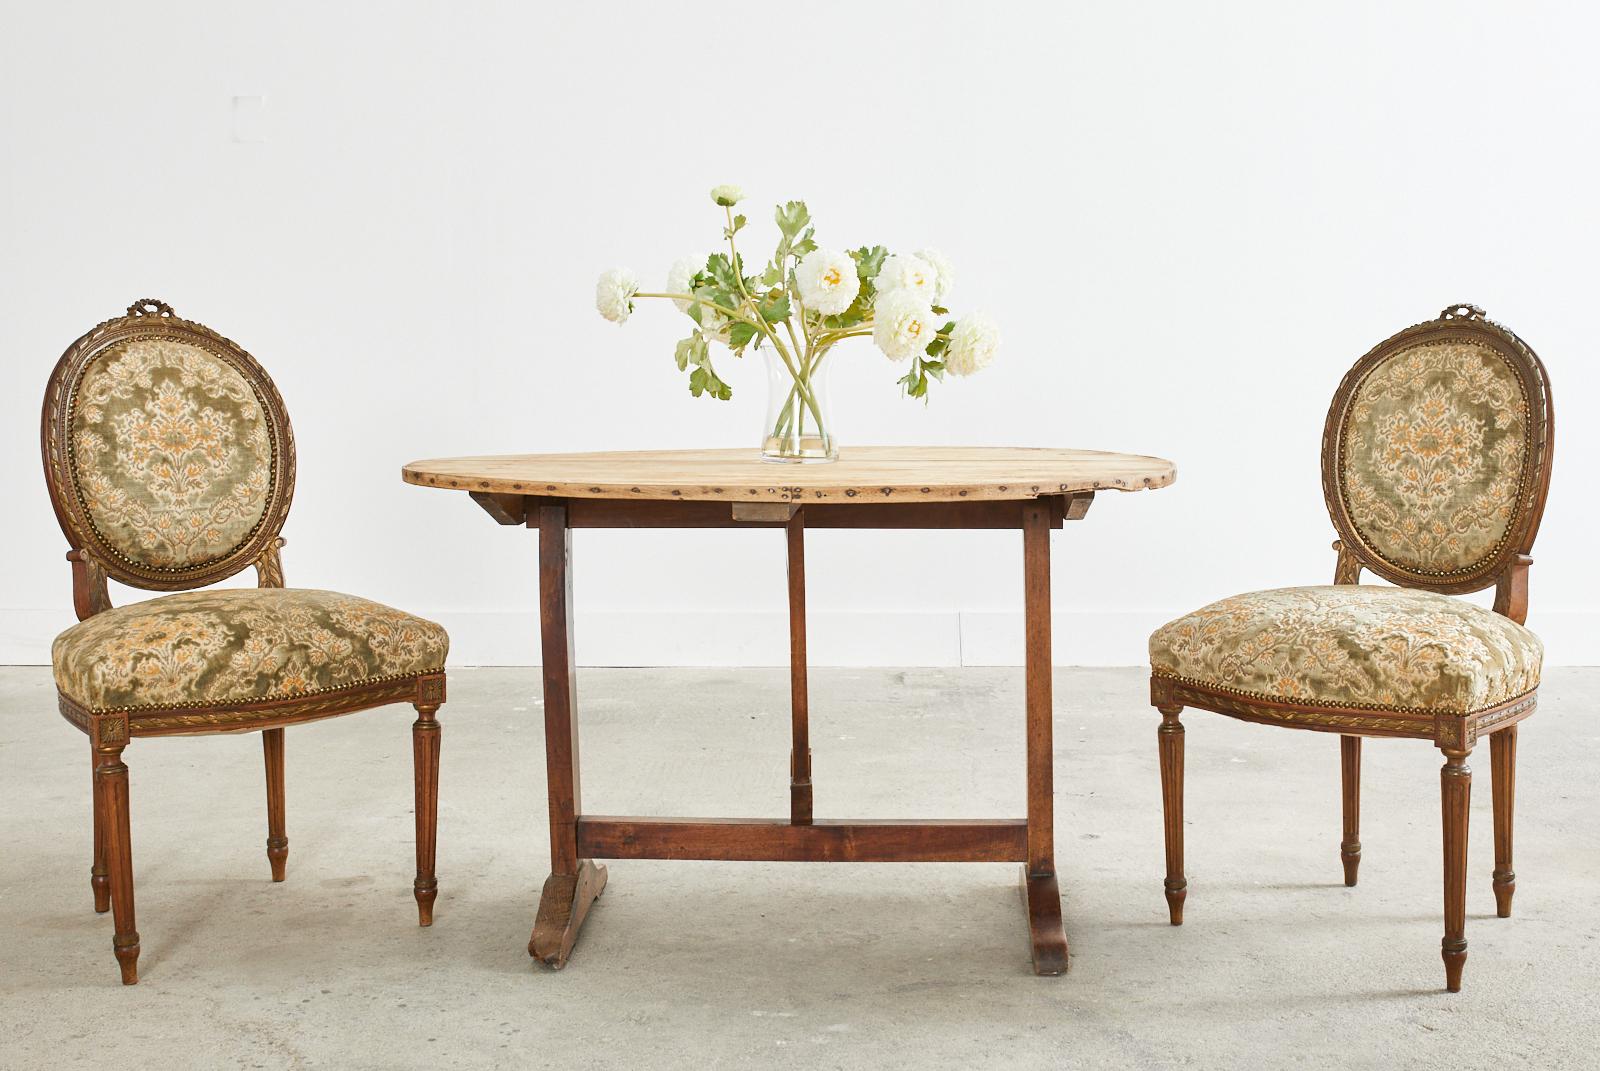 Classic set of 19th century French dining chairs crafted from mahogany. The set consists of two armchairs and two side chairs the later measuring 21